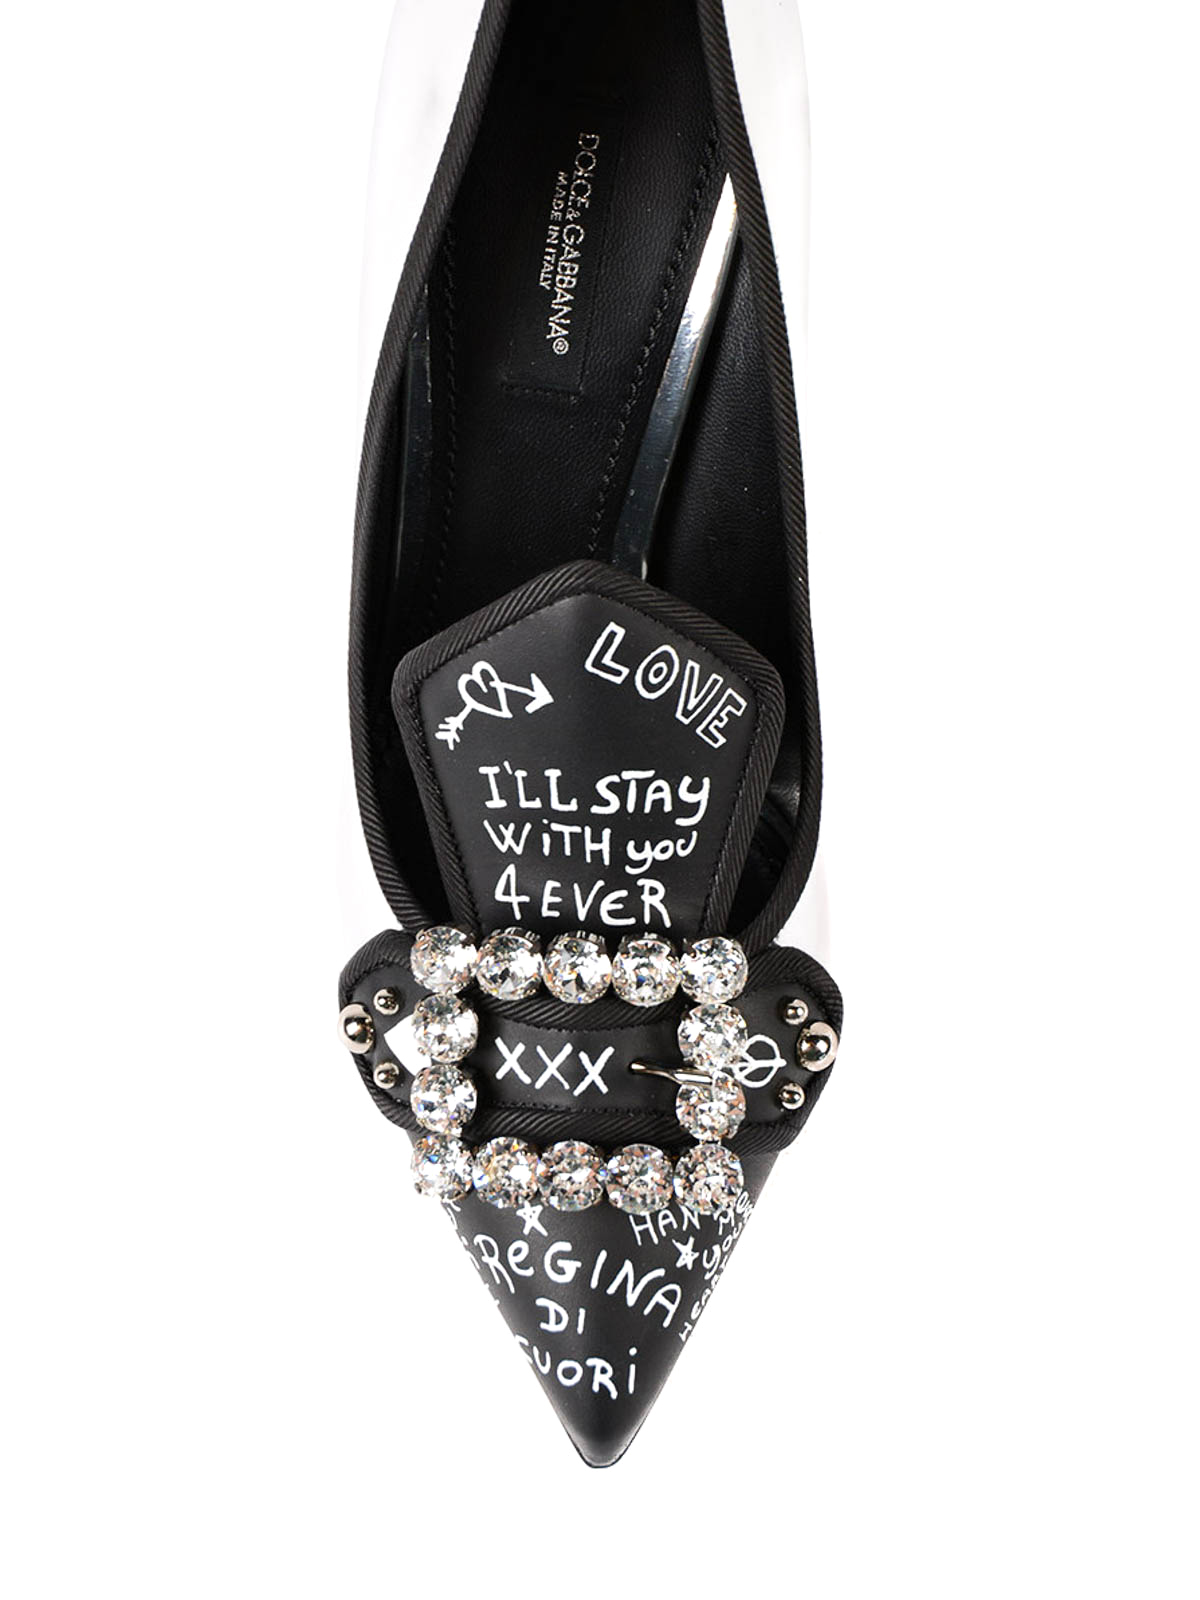 Court shoes Dolce & Gabbana - Jewel pumps with writings - CD0935AM948HNF57